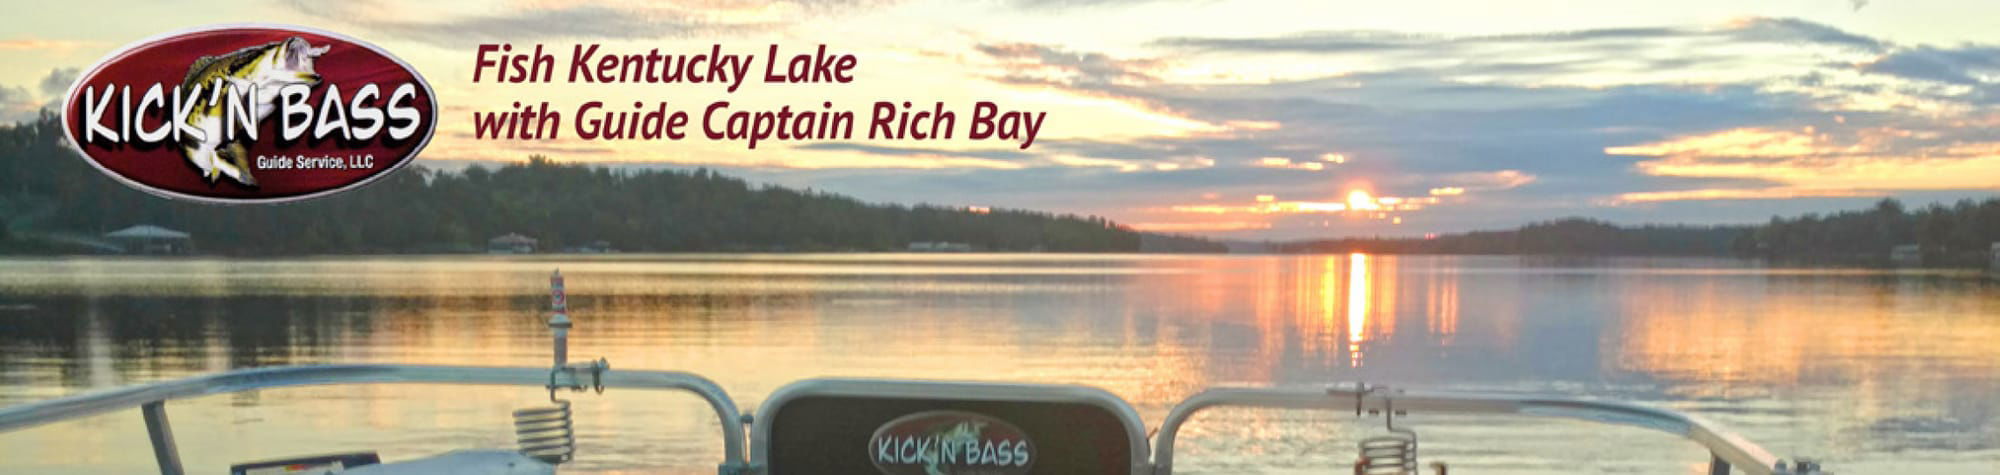 Your Kick'n Bass Fishing Report for May 13, 2019